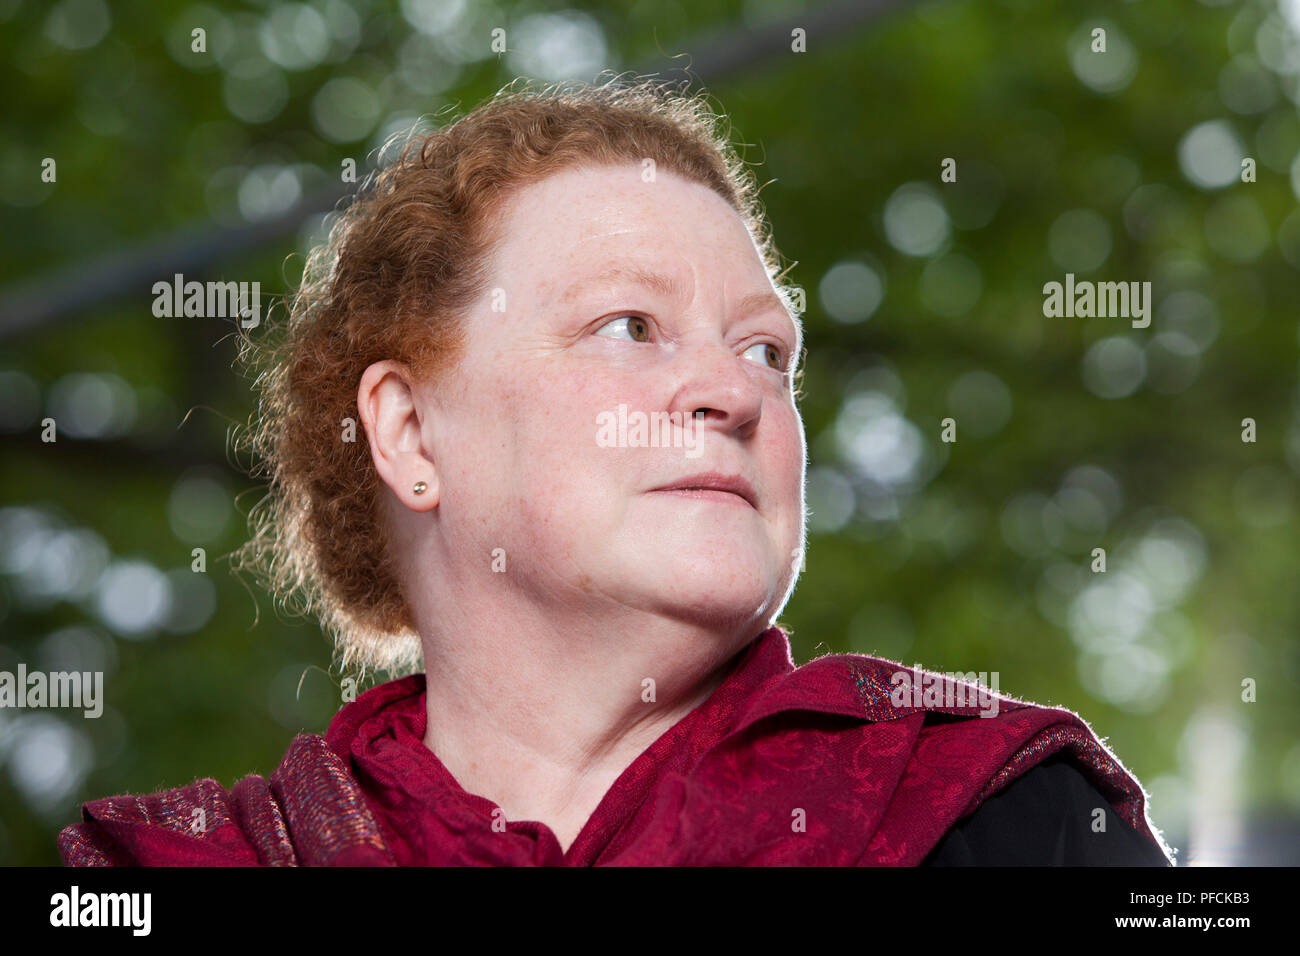 Edinburgh, UK. 21st August, 2018. Dame Susan Margaret Black DBE FRSE FRCP is a Scottish forensic anthropologist, anatomist and academic. She is Professor of Anatomy and Forensic Anthropology at the University of Dundee. Pictured at the Edinburgh International Book Festival. Edinburgh, Scotland.  Picture by Gary Doak / Alamy Live News Stock Photo